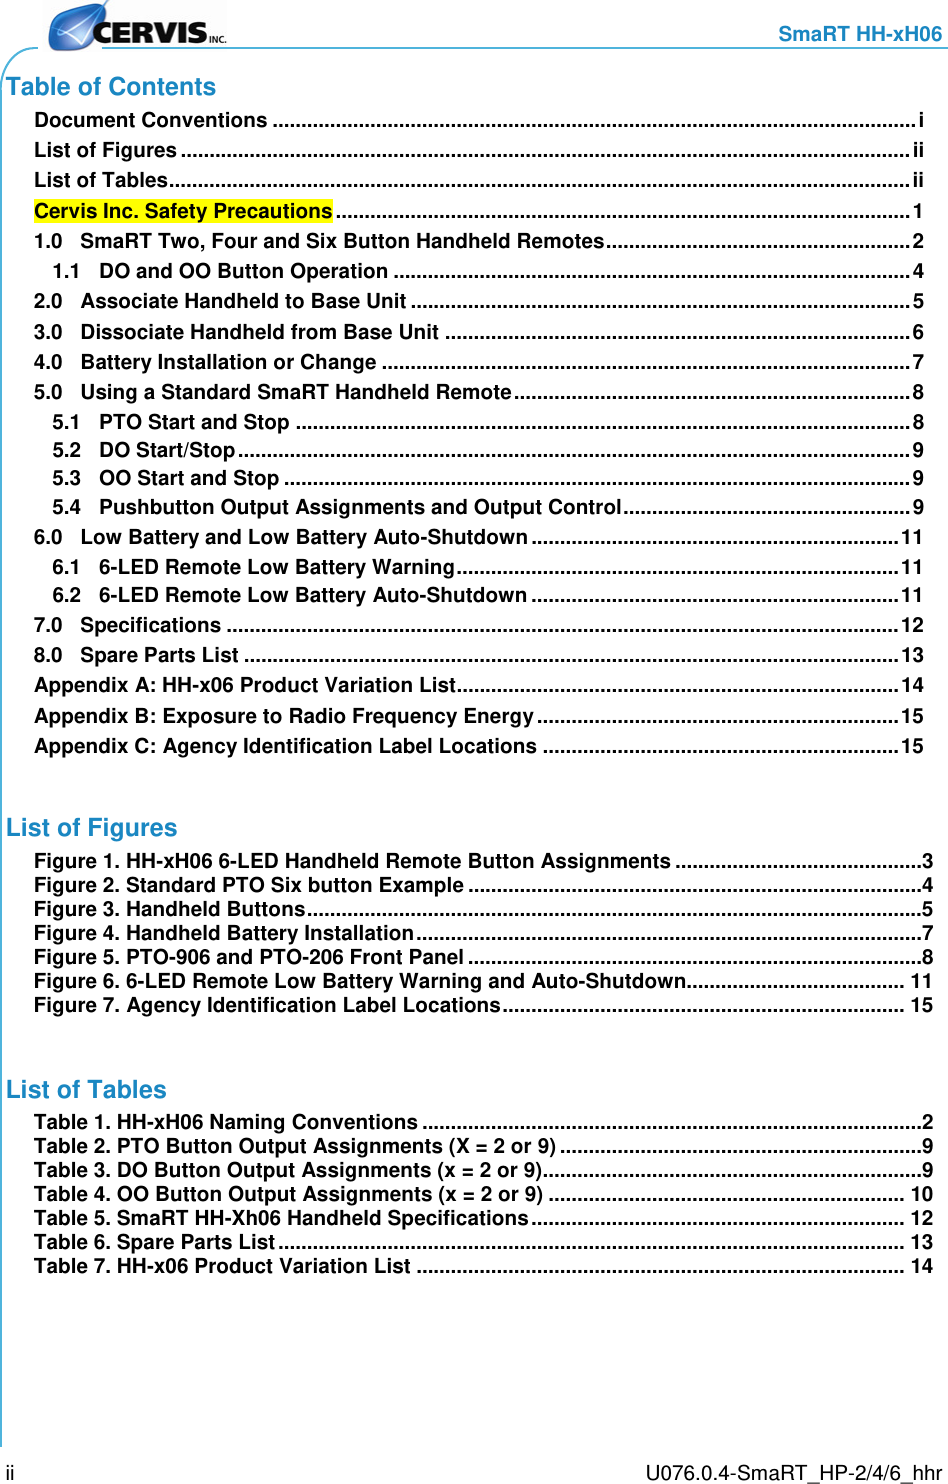     SmaRT HH-xH06     U076.0.4-SmaRT_HP-2/4/6_hhr ii Table of Contents Document Conventions ................................................................................................................ i List of Figures ............................................................................................................................... ii List of Tables ................................................................................................................................. ii Cervis Inc. Safety Precautions .................................................................................................... 1 1.0 SmaRT Two, Four and Six Button Handheld Remotes ..................................................... 2 1.1 DO and OO Button Operation .......................................................................................... 4 2.0 Associate Handheld to Base Unit ....................................................................................... 5 3.0 Dissociate Handheld from Base Unit ................................................................................. 6 4.0 Battery Installation or Change ............................................................................................ 7 5.0 Using a Standard SmaRT Handheld Remote ..................................................................... 8 5.1 PTO Start and Stop ........................................................................................................... 8 5.2 DO Start/Stop ..................................................................................................................... 9 5.3 OO Start and Stop ............................................................................................................. 9 5.4 Pushbutton Output Assignments and Output Control .................................................. 9 6.0 Low Battery and Low Battery Auto-Shutdown ................................................................ 11 6.1 6-LED Remote Low Battery Warning ............................................................................. 11 6.2 6-LED Remote Low Battery Auto-Shutdown ................................................................ 11 7.0 Specifications ..................................................................................................................... 12 8.0 Spare Parts List .................................................................................................................. 13 Appendix A: HH-x06 Product Variation List............................................................................. 14 Appendix B: Exposure to Radio Frequency Energy ............................................................... 15 Appendix C: Agency Identification Label Locations .............................................................. 15  List of Figures Figure 1. HH-xH06 6-LED Handheld Remote Button Assignments ...........................................3 Figure 2. Standard PTO Six button Example ...............................................................................4 Figure 3. Handheld Buttons ...........................................................................................................5 Figure 4. Handheld Battery Installation ........................................................................................7 Figure 5. PTO-906 and PTO-206 Front Panel ...............................................................................8 Figure 6. 6-LED Remote Low Battery Warning and Auto-Shutdown...................................... 11 Figure 7. Agency Identification Label Locations ...................................................................... 15  List of Tables Table 1. HH-xH06 Naming Conventions .......................................................................................2 Table 2. PTO Button Output Assignments (X = 2 or 9) ...............................................................9 Table 3. DO Button Output Assignments (x = 2 or 9)..................................................................9 Table 4. OO Button Output Assignments (x = 2 or 9) .............................................................. 10 Table 5. SmaRT HH-Xh06 Handheld Specifications ................................................................. 12 Table 6. Spare Parts List ............................................................................................................. 13 Table 7. HH-x06 Product Variation List ..................................................................................... 14   